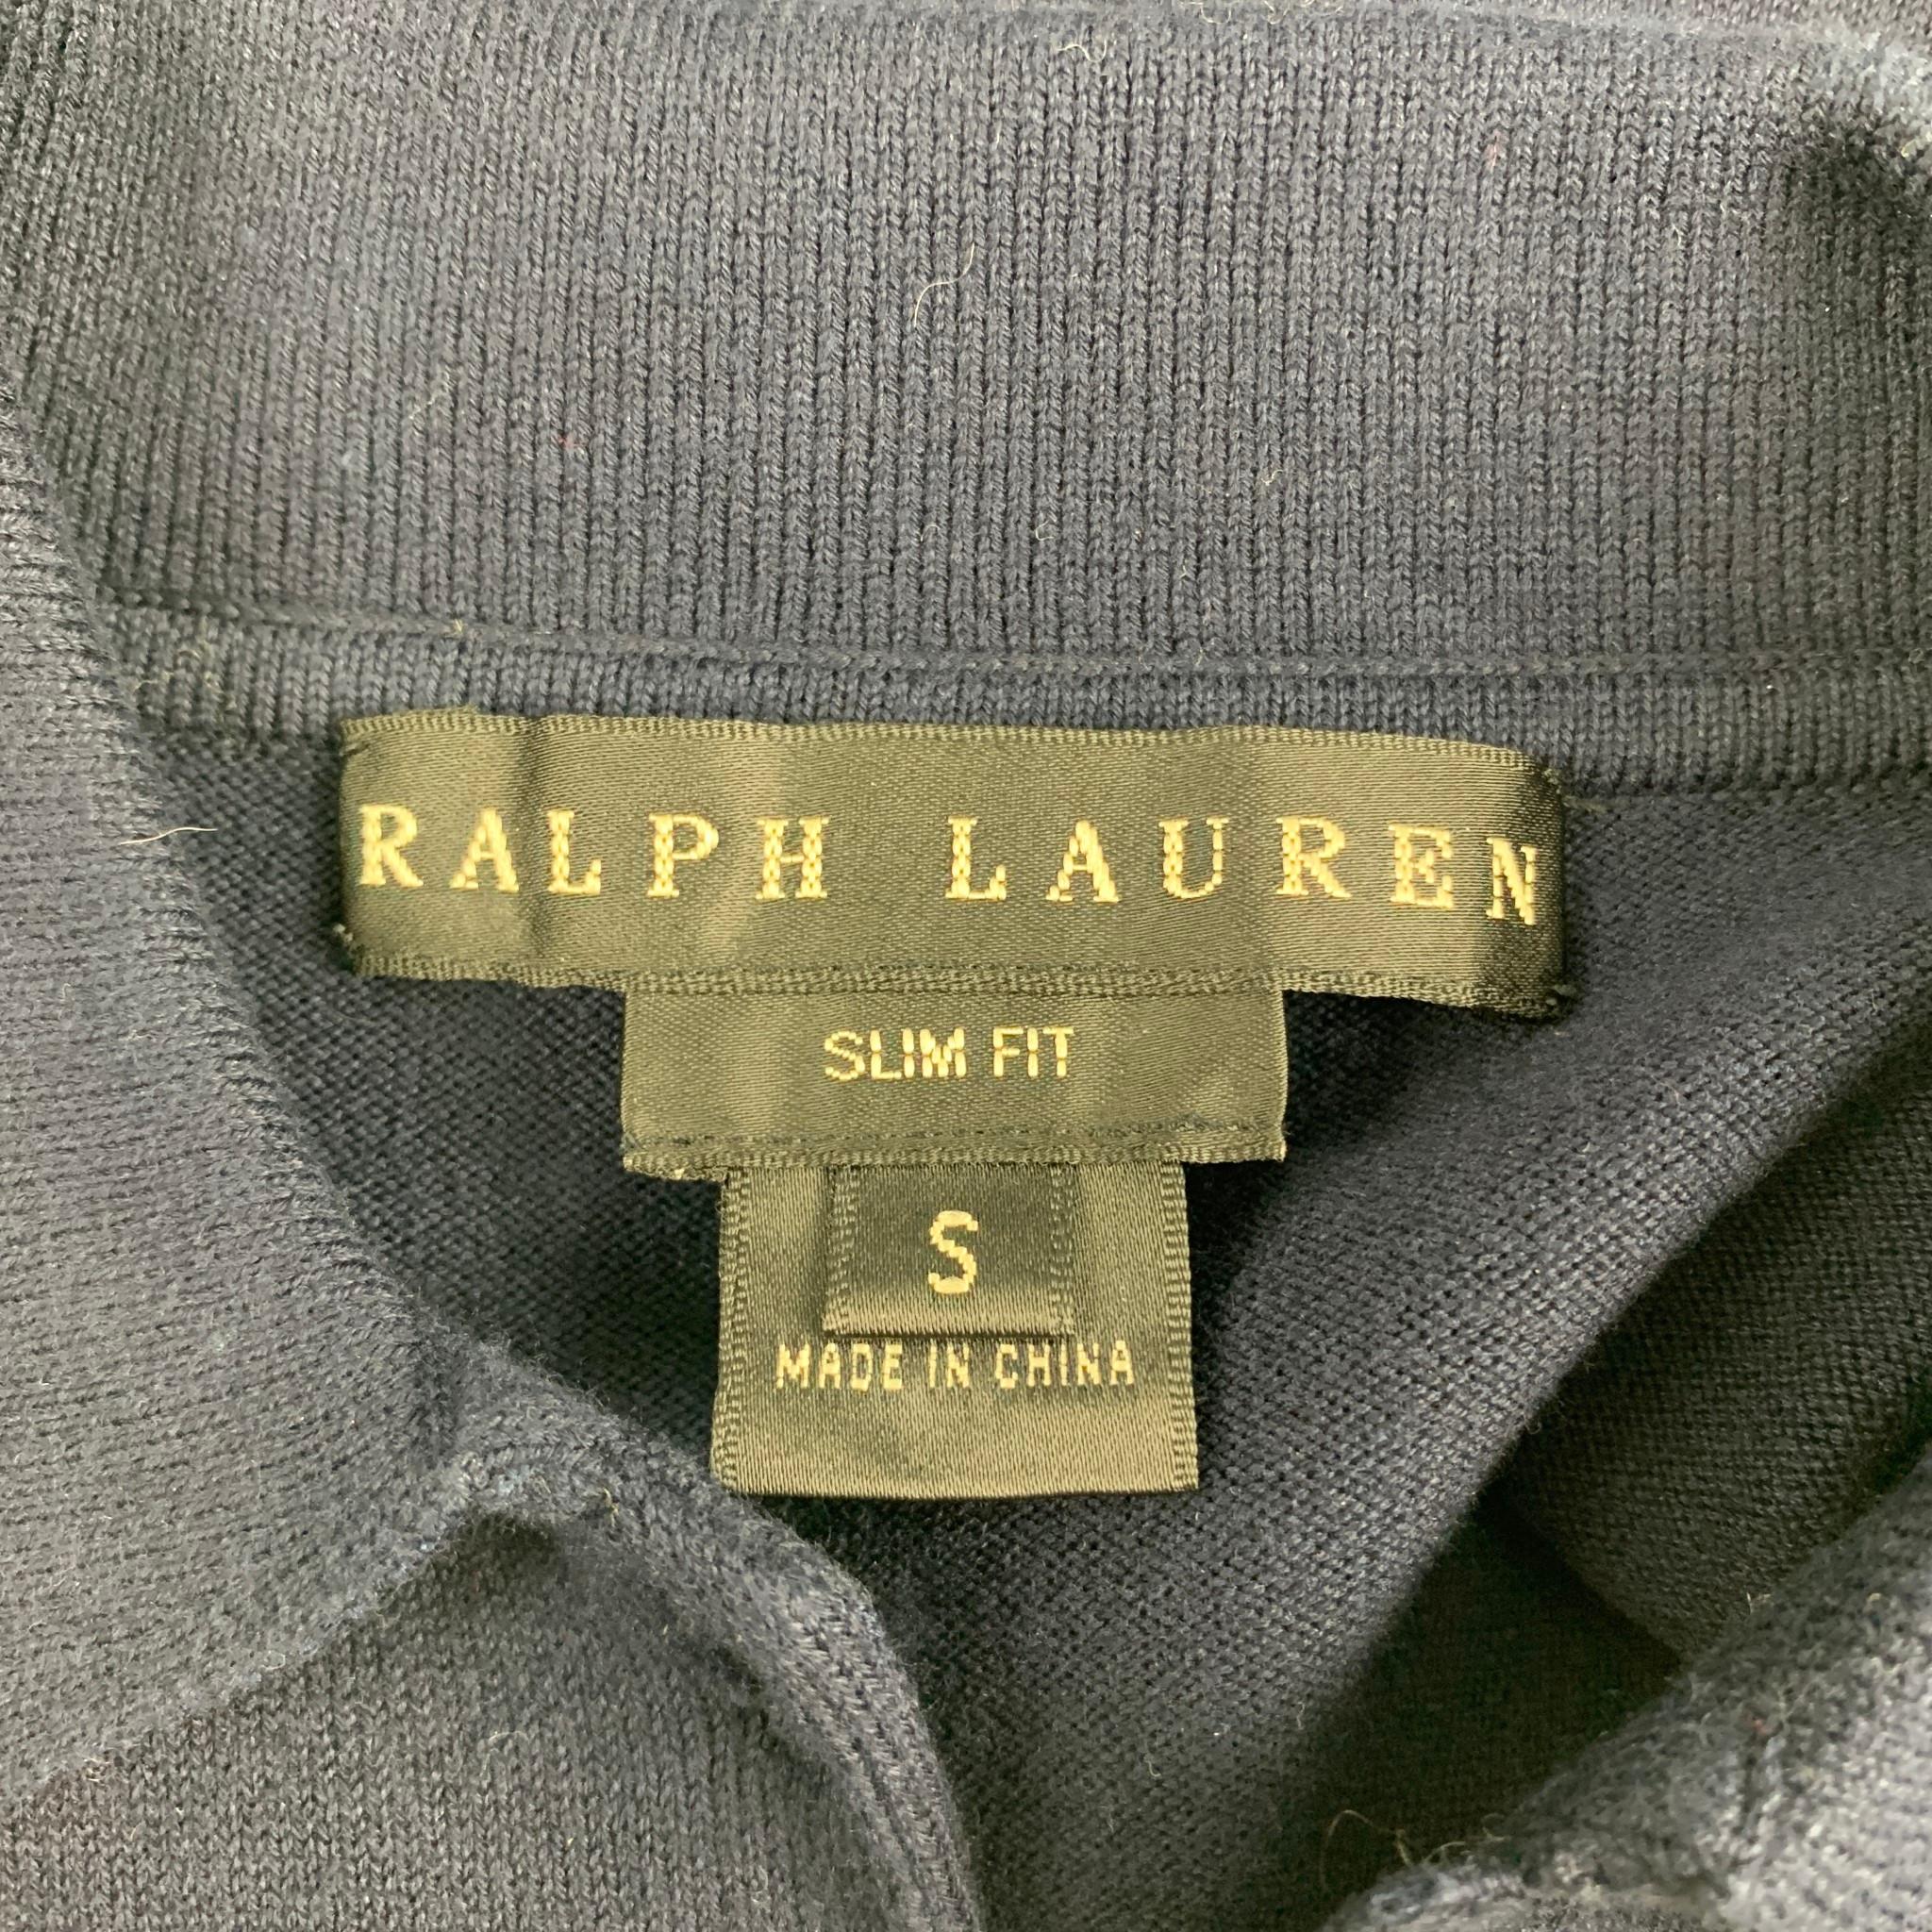 RALPH LAUREN polo comes in a navy knitted cotton blend featuring a slim fit, spread collar, and a half button closure.

Good Pre-Owned Condition.
Marked: S

Measurements:

Shoulder: 17.5 in.
Bust: 32 in.
Sleeve: 4 in.
Length: 18 in. 